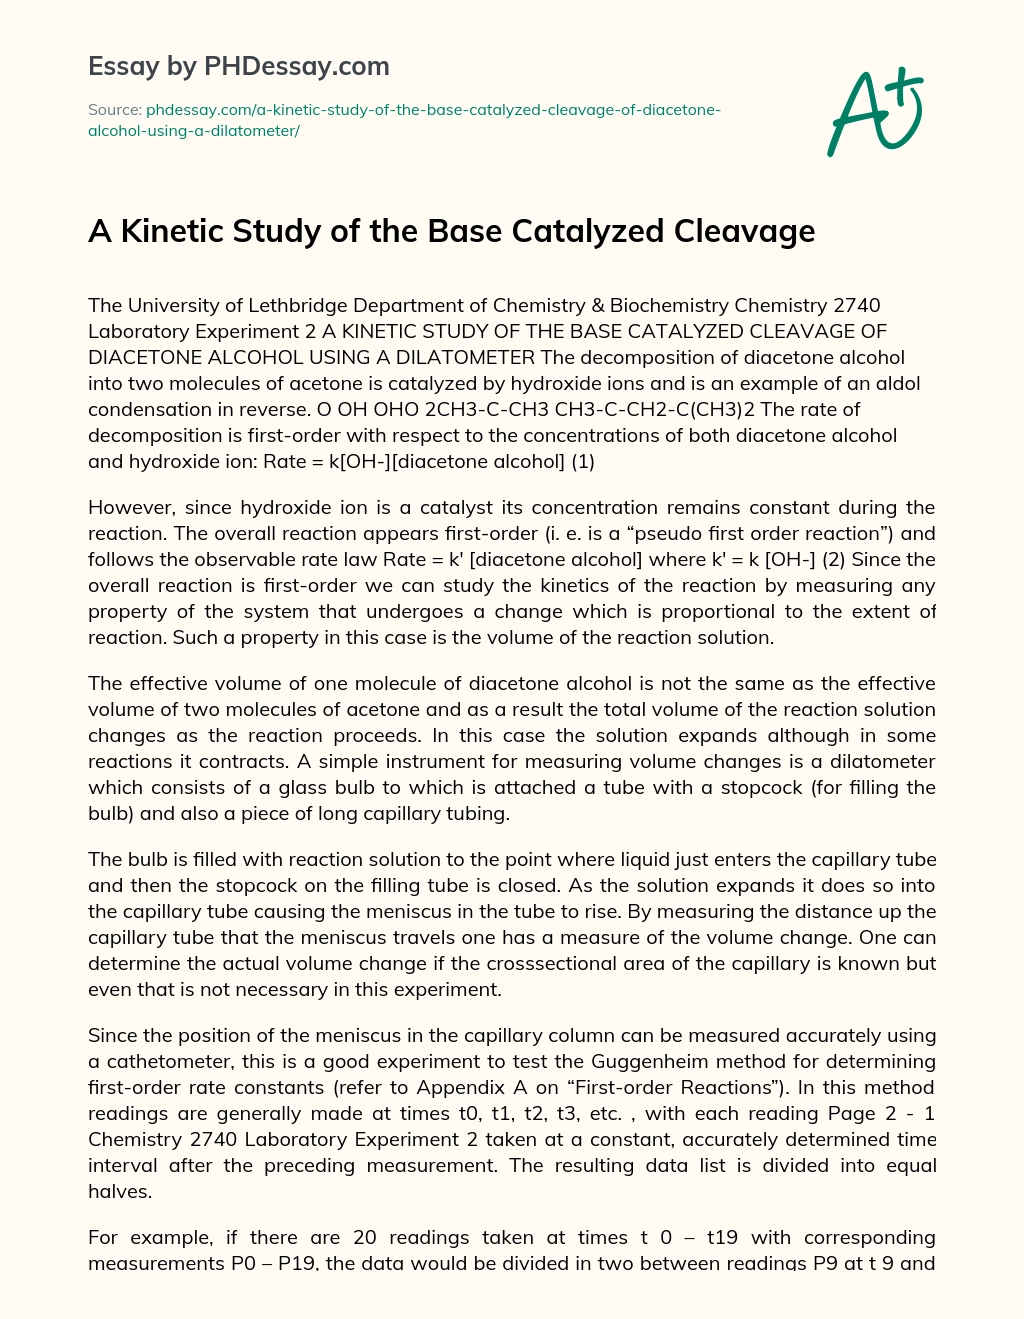 A Kinetic Study of the Base Catalyzed Cleavage essay